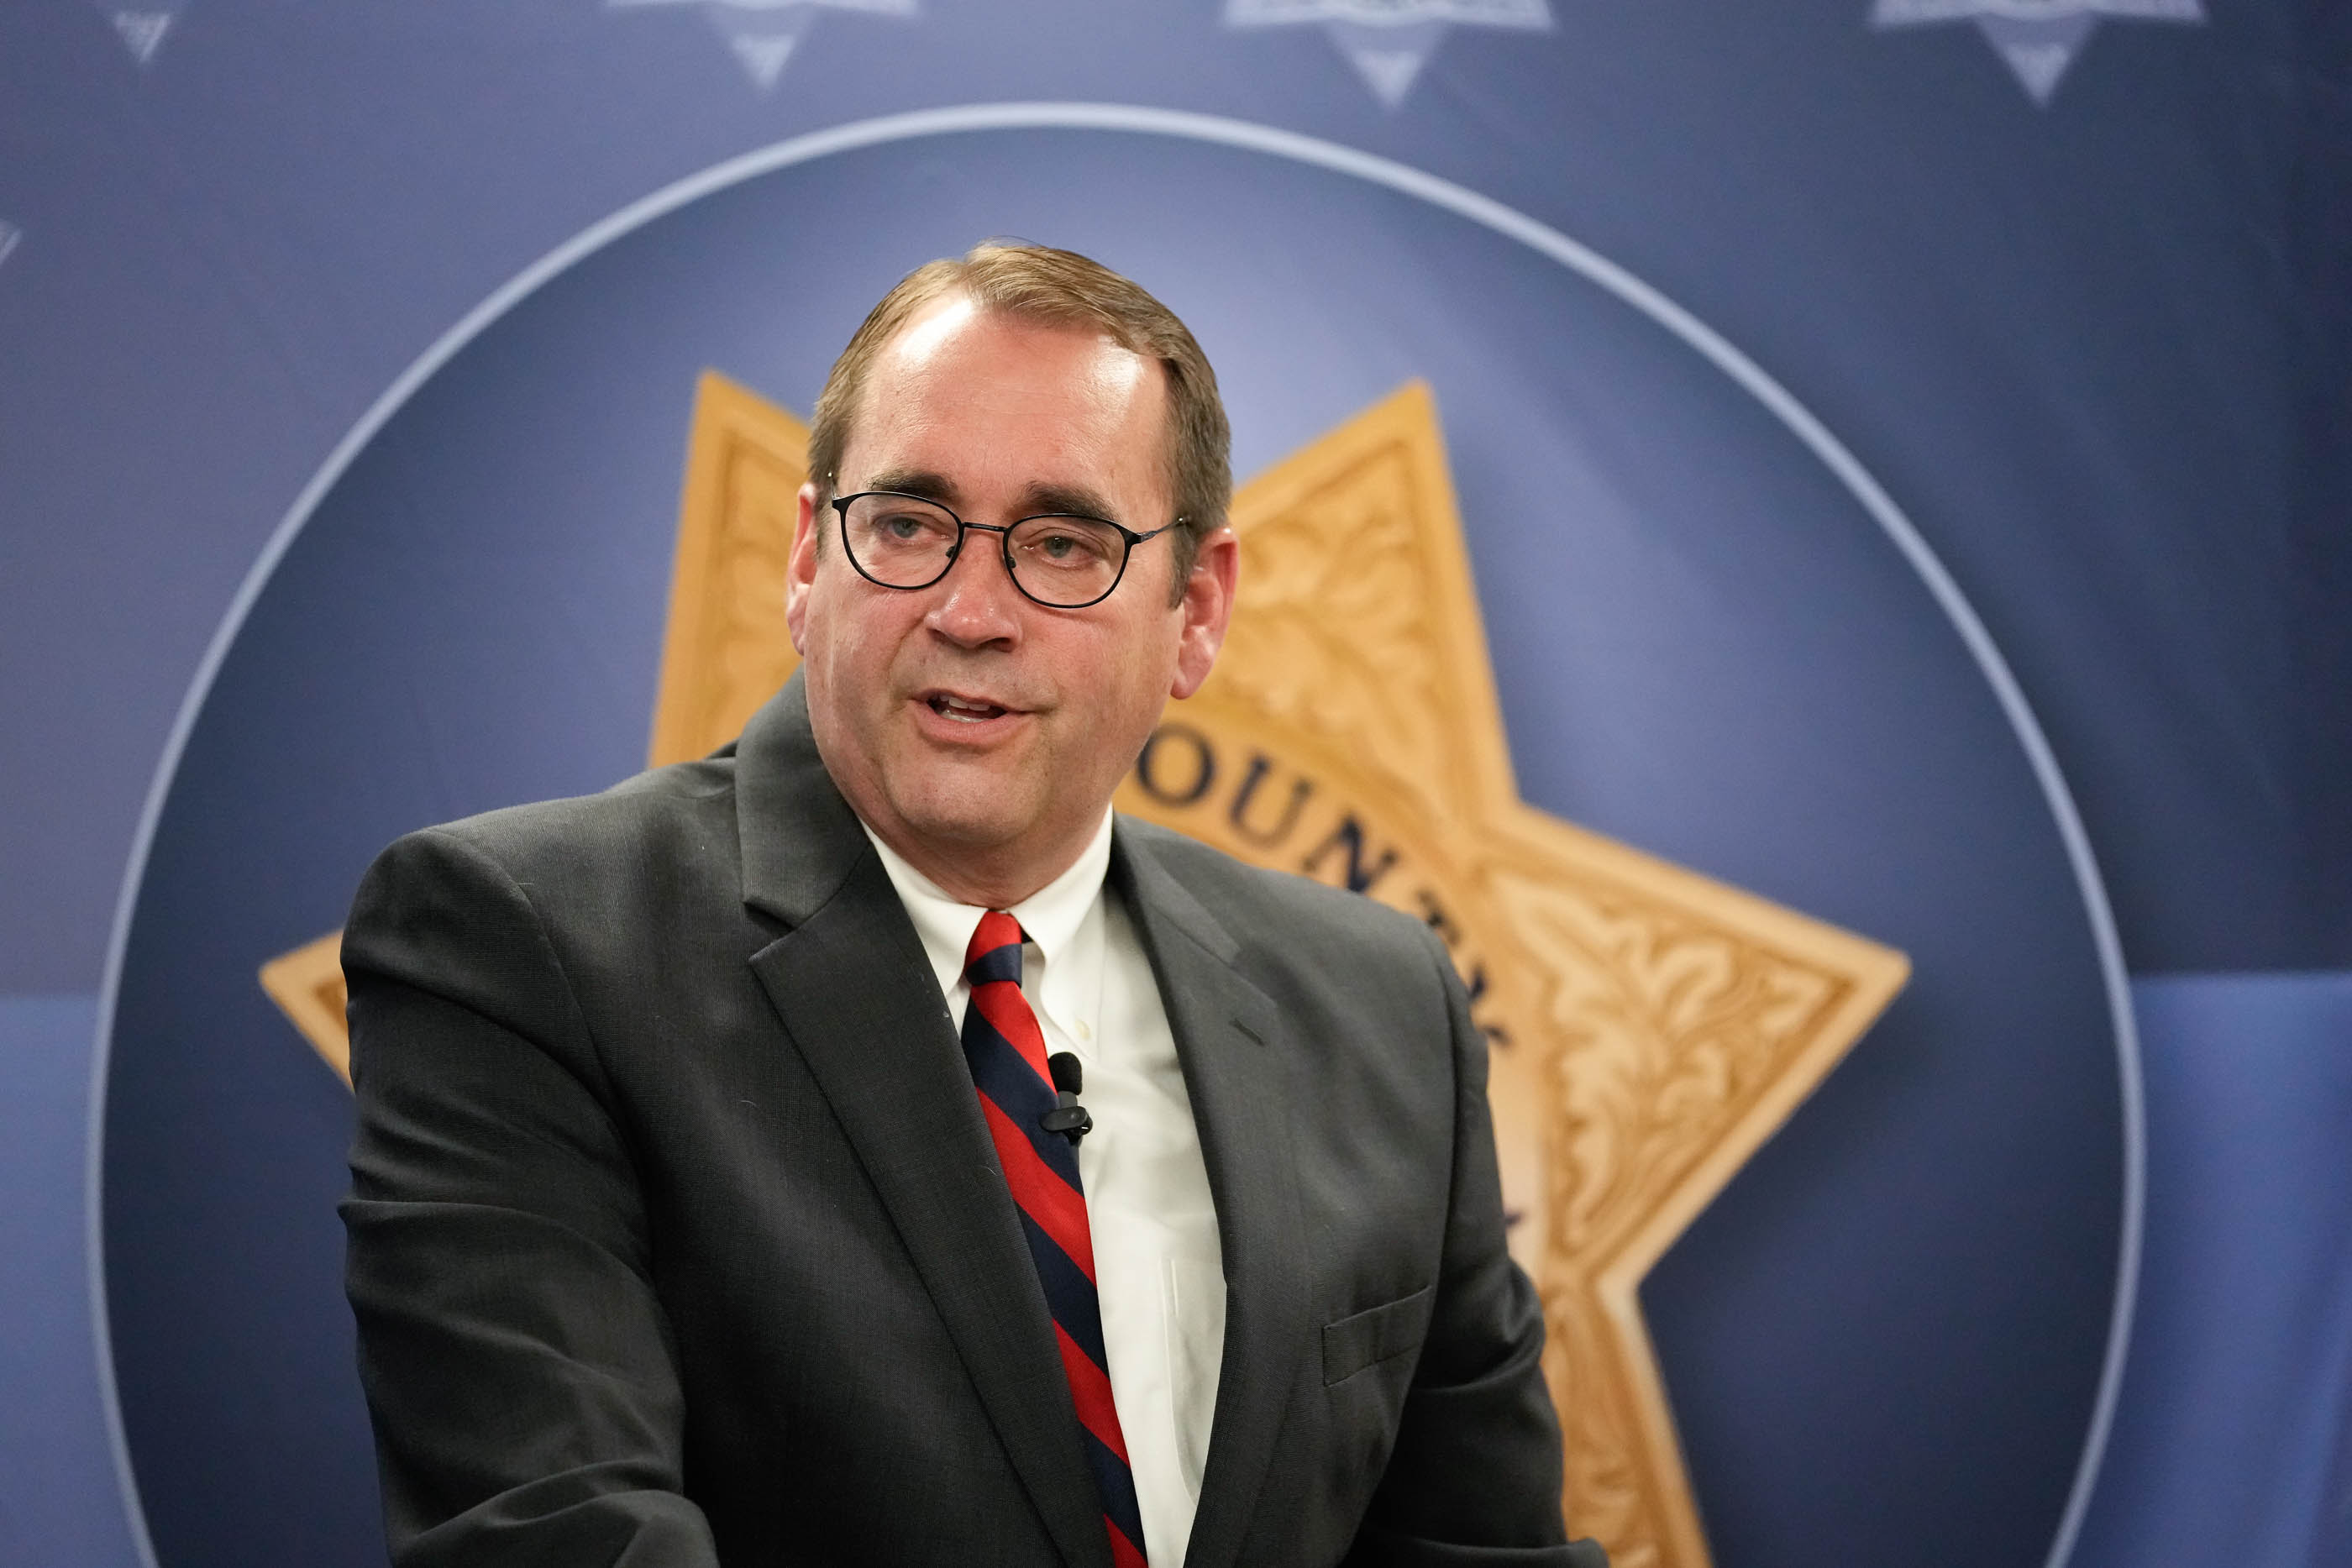 Man charged in connection with Utah County sheriff's 'ritualistic' sex  abuse investigation